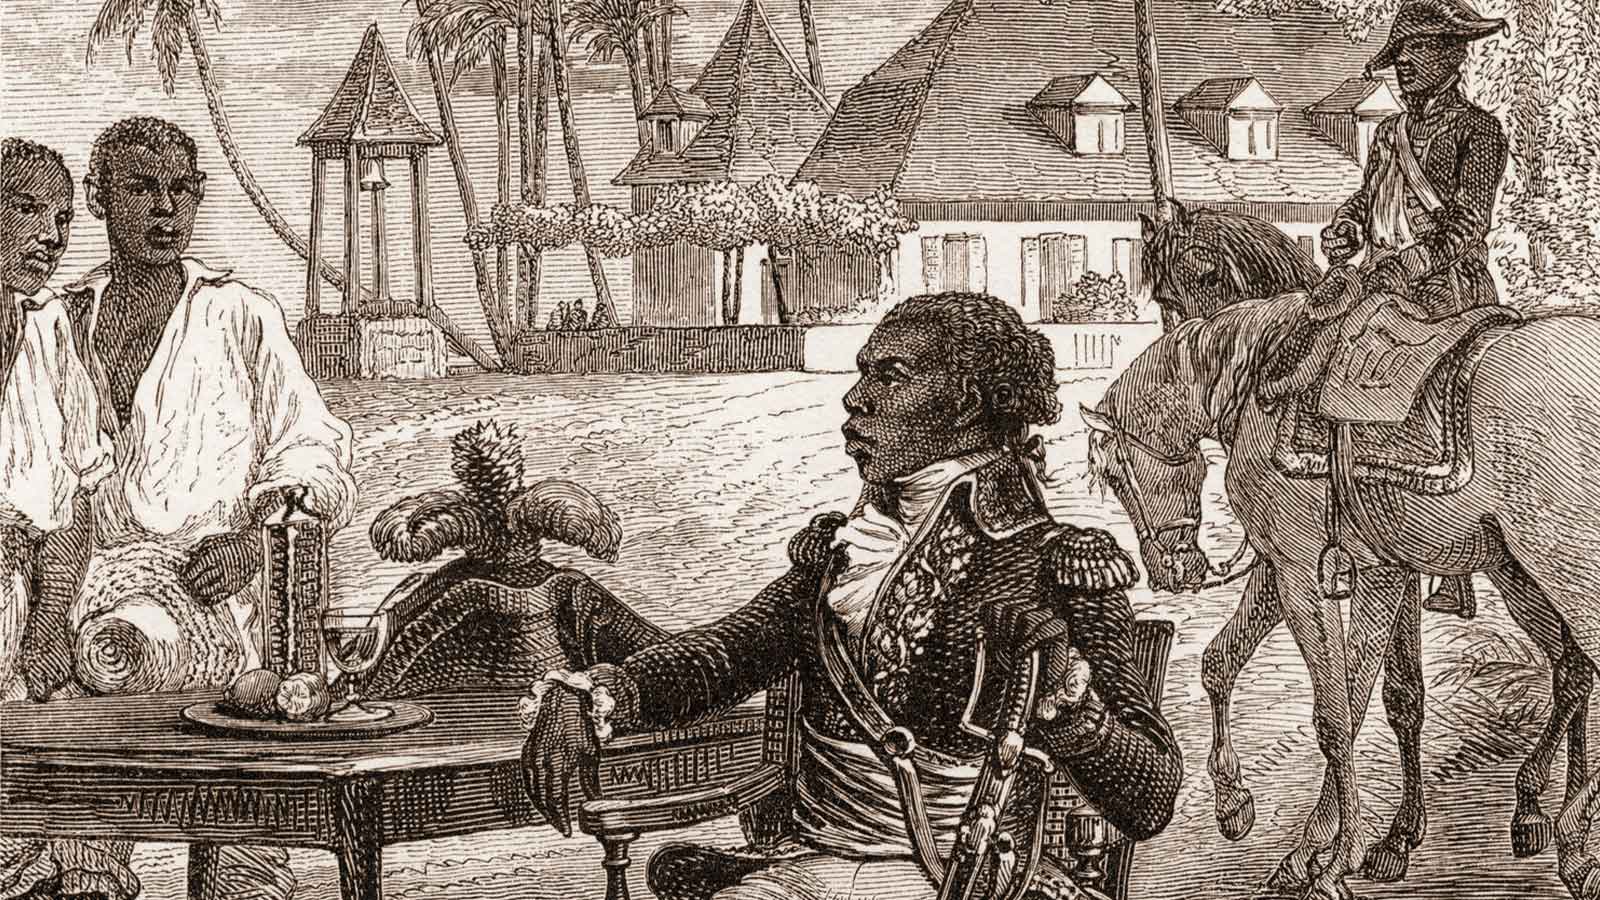 A drawing of Toussaint Louverture, a leader of the Haitian Revolution.